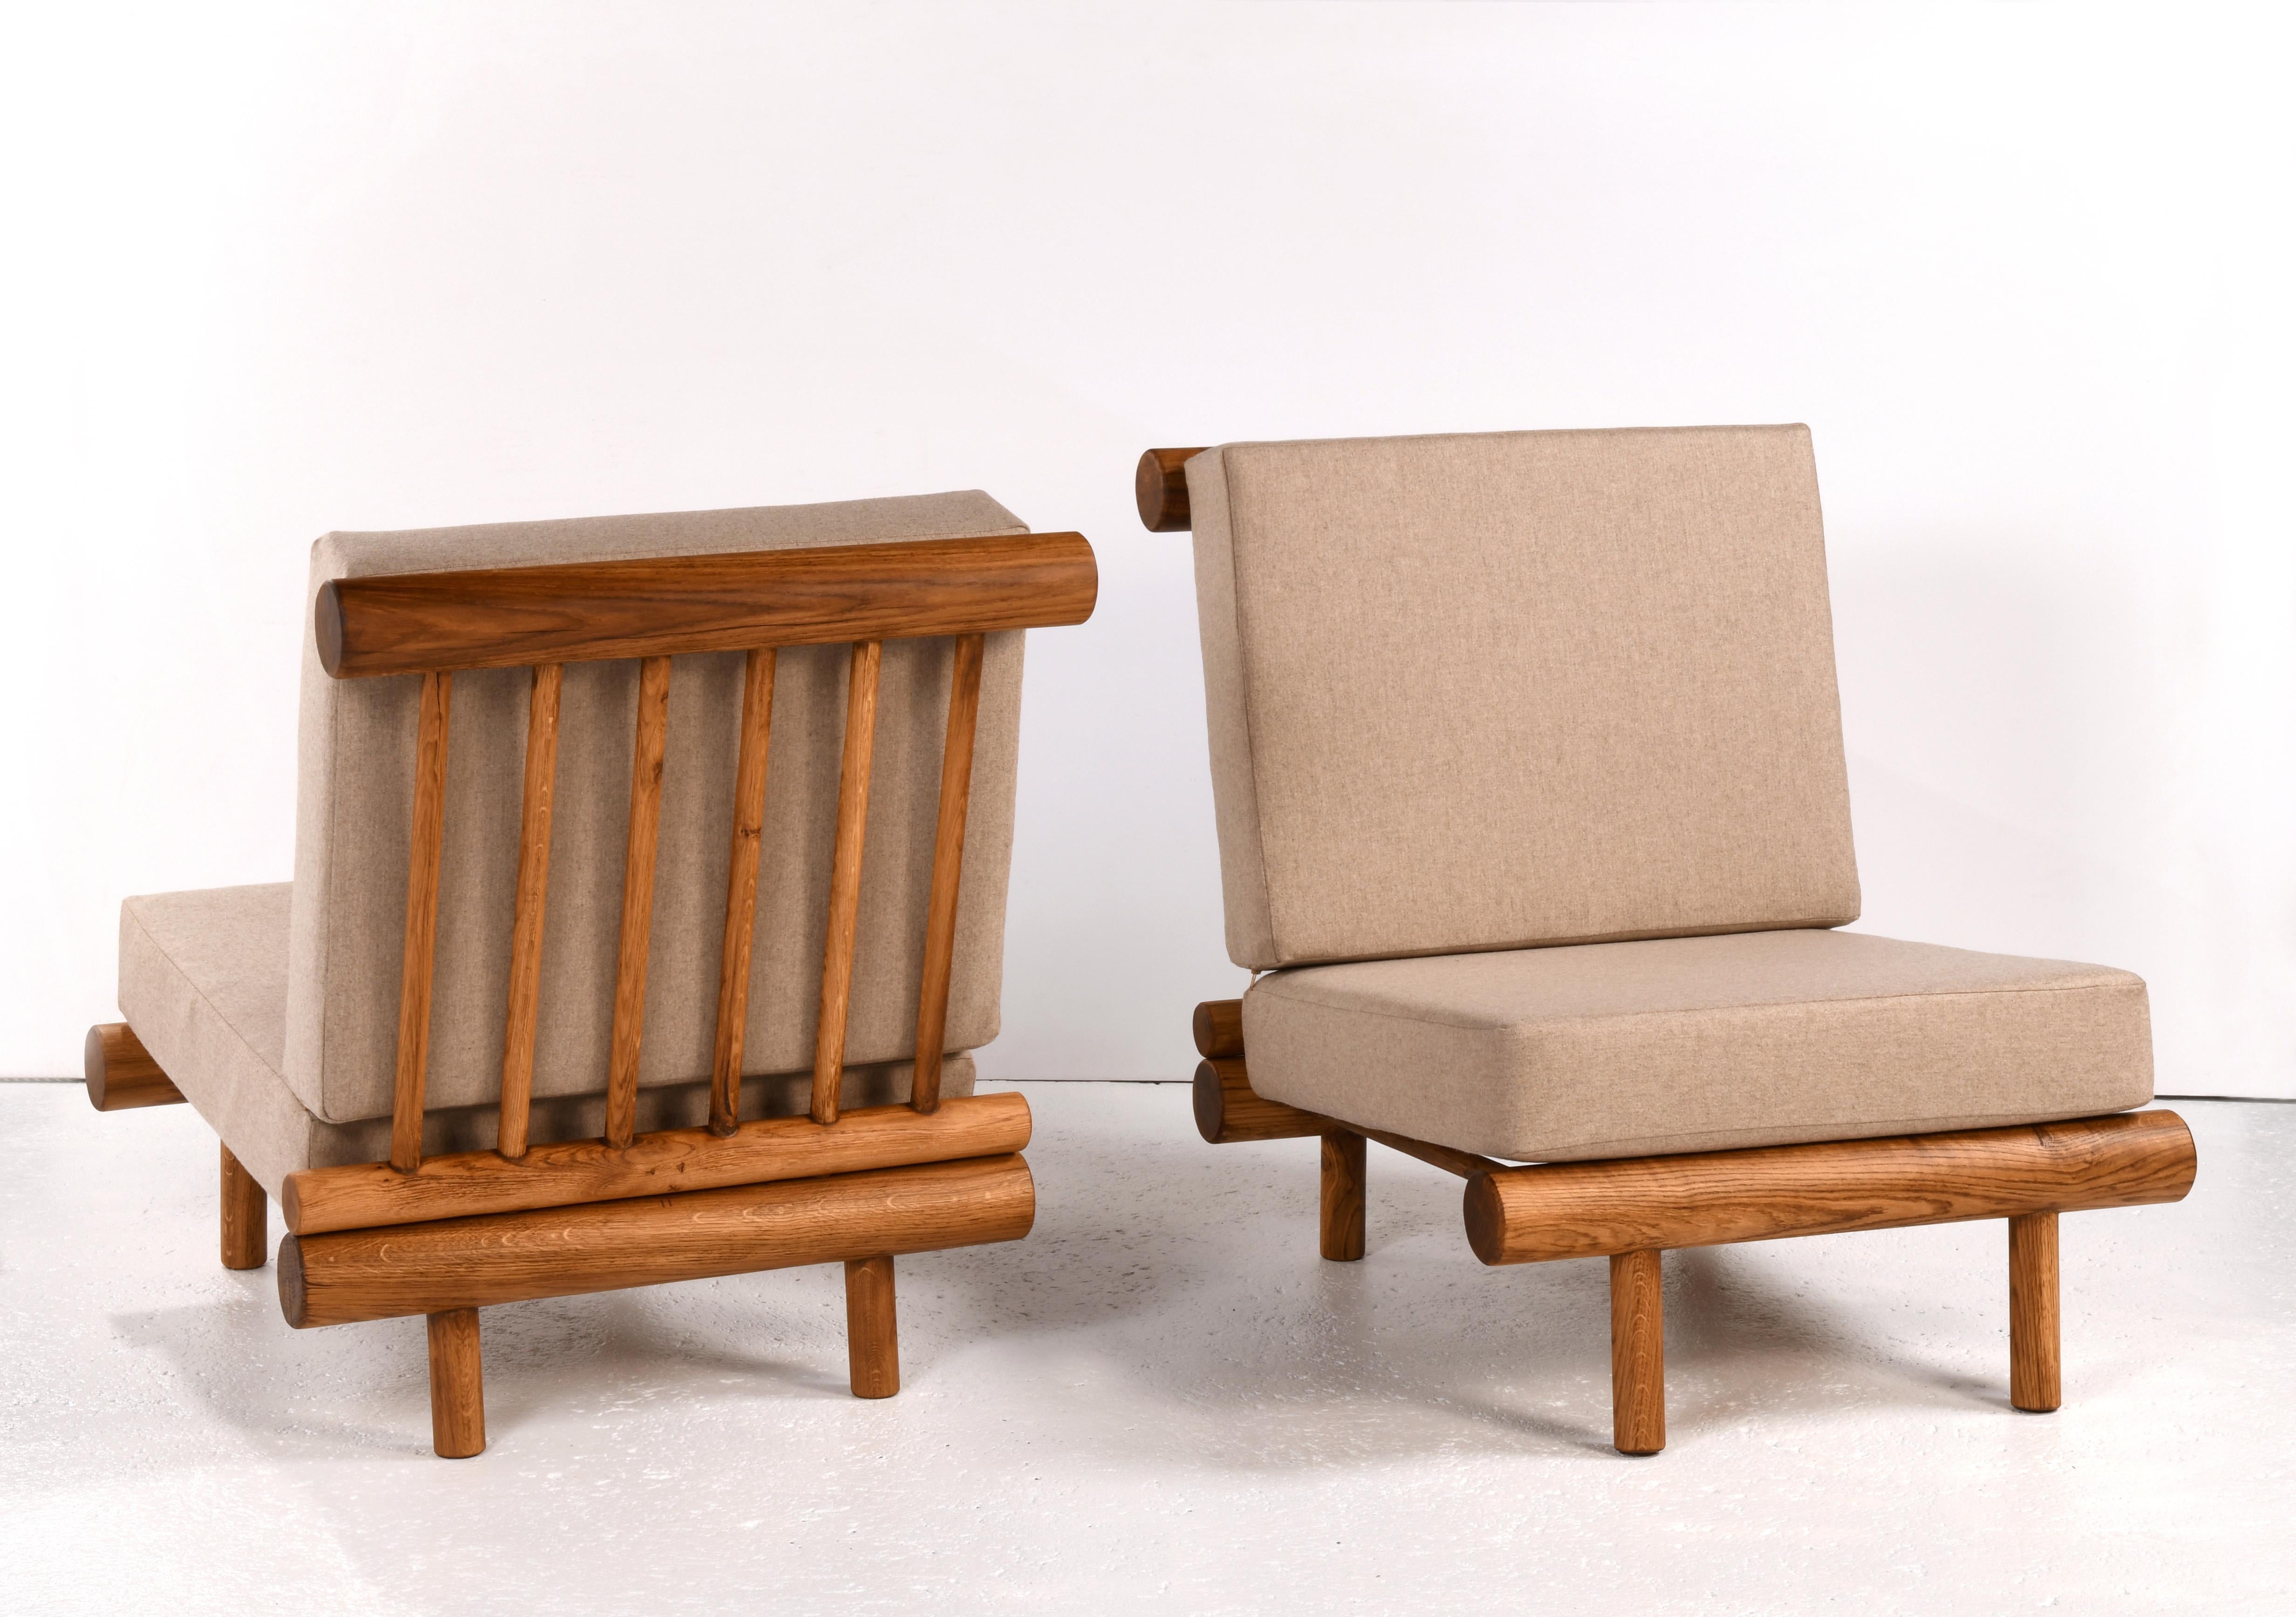 Pair of oak fireside chairs called La cachette, attributed to Charlotte Perriand 1